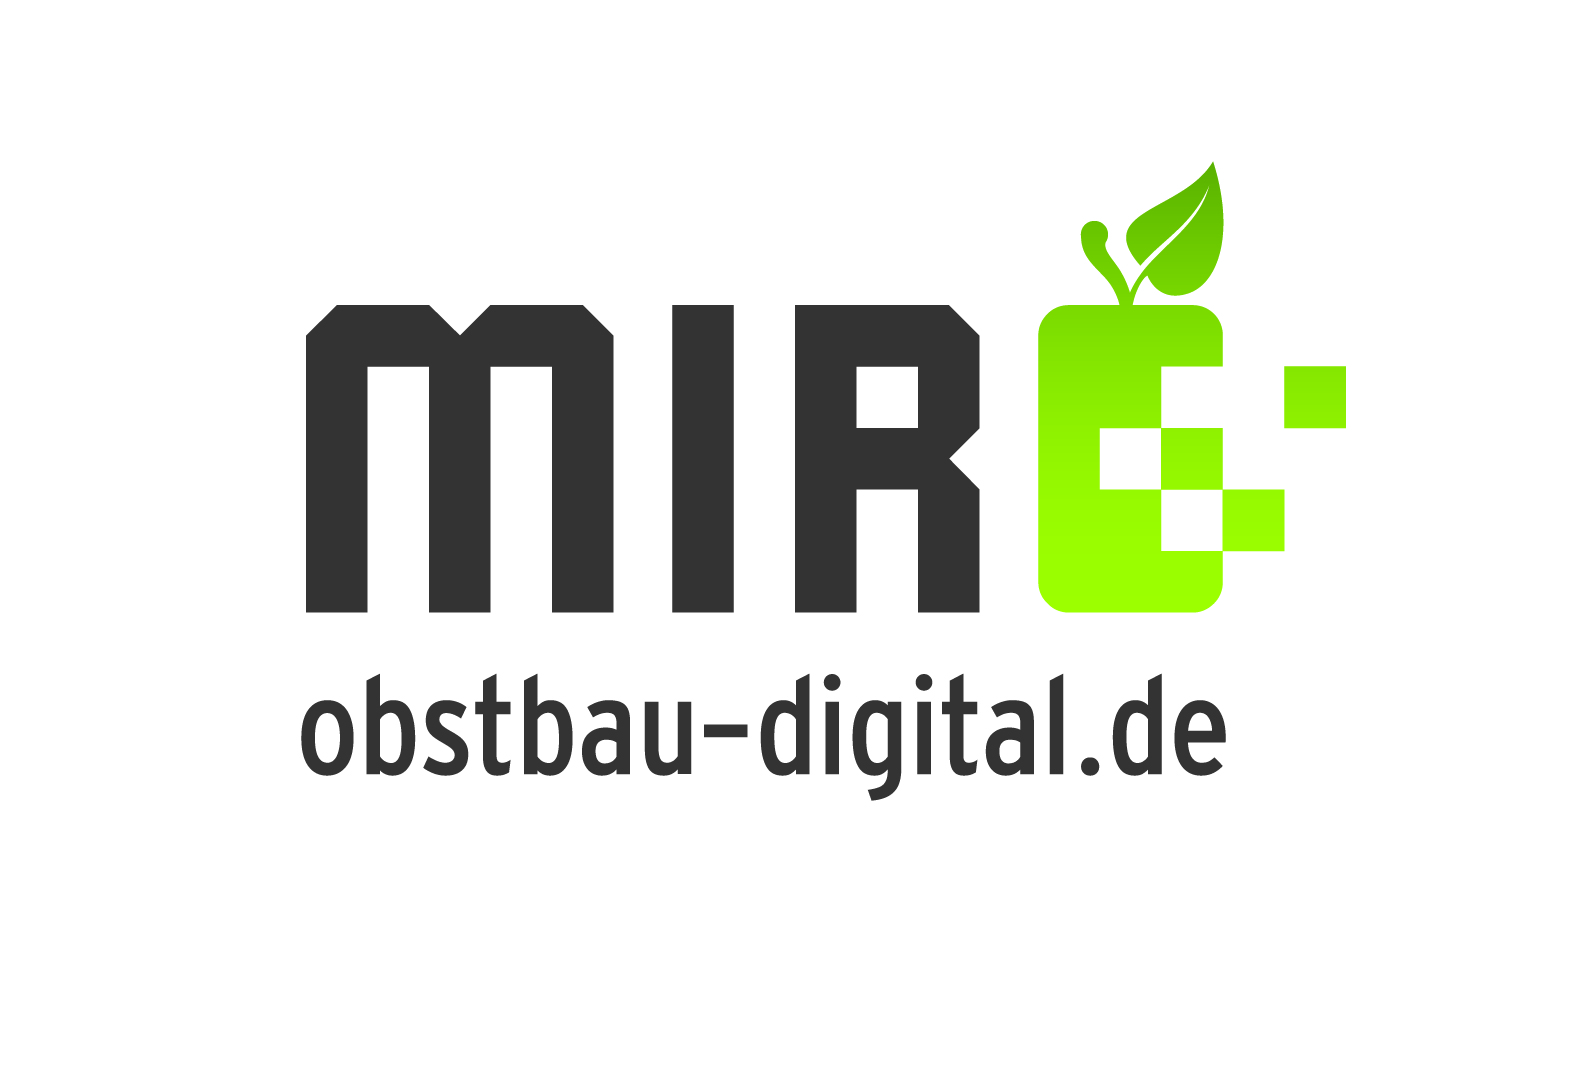 Logo of the project Mitteldeutsche Innovationsregion Obstbau. The lettering MIRO is shown in small letters, the "O" in the shape of a green apple in pixels. Below is the reference to the website obstbau-digital.de